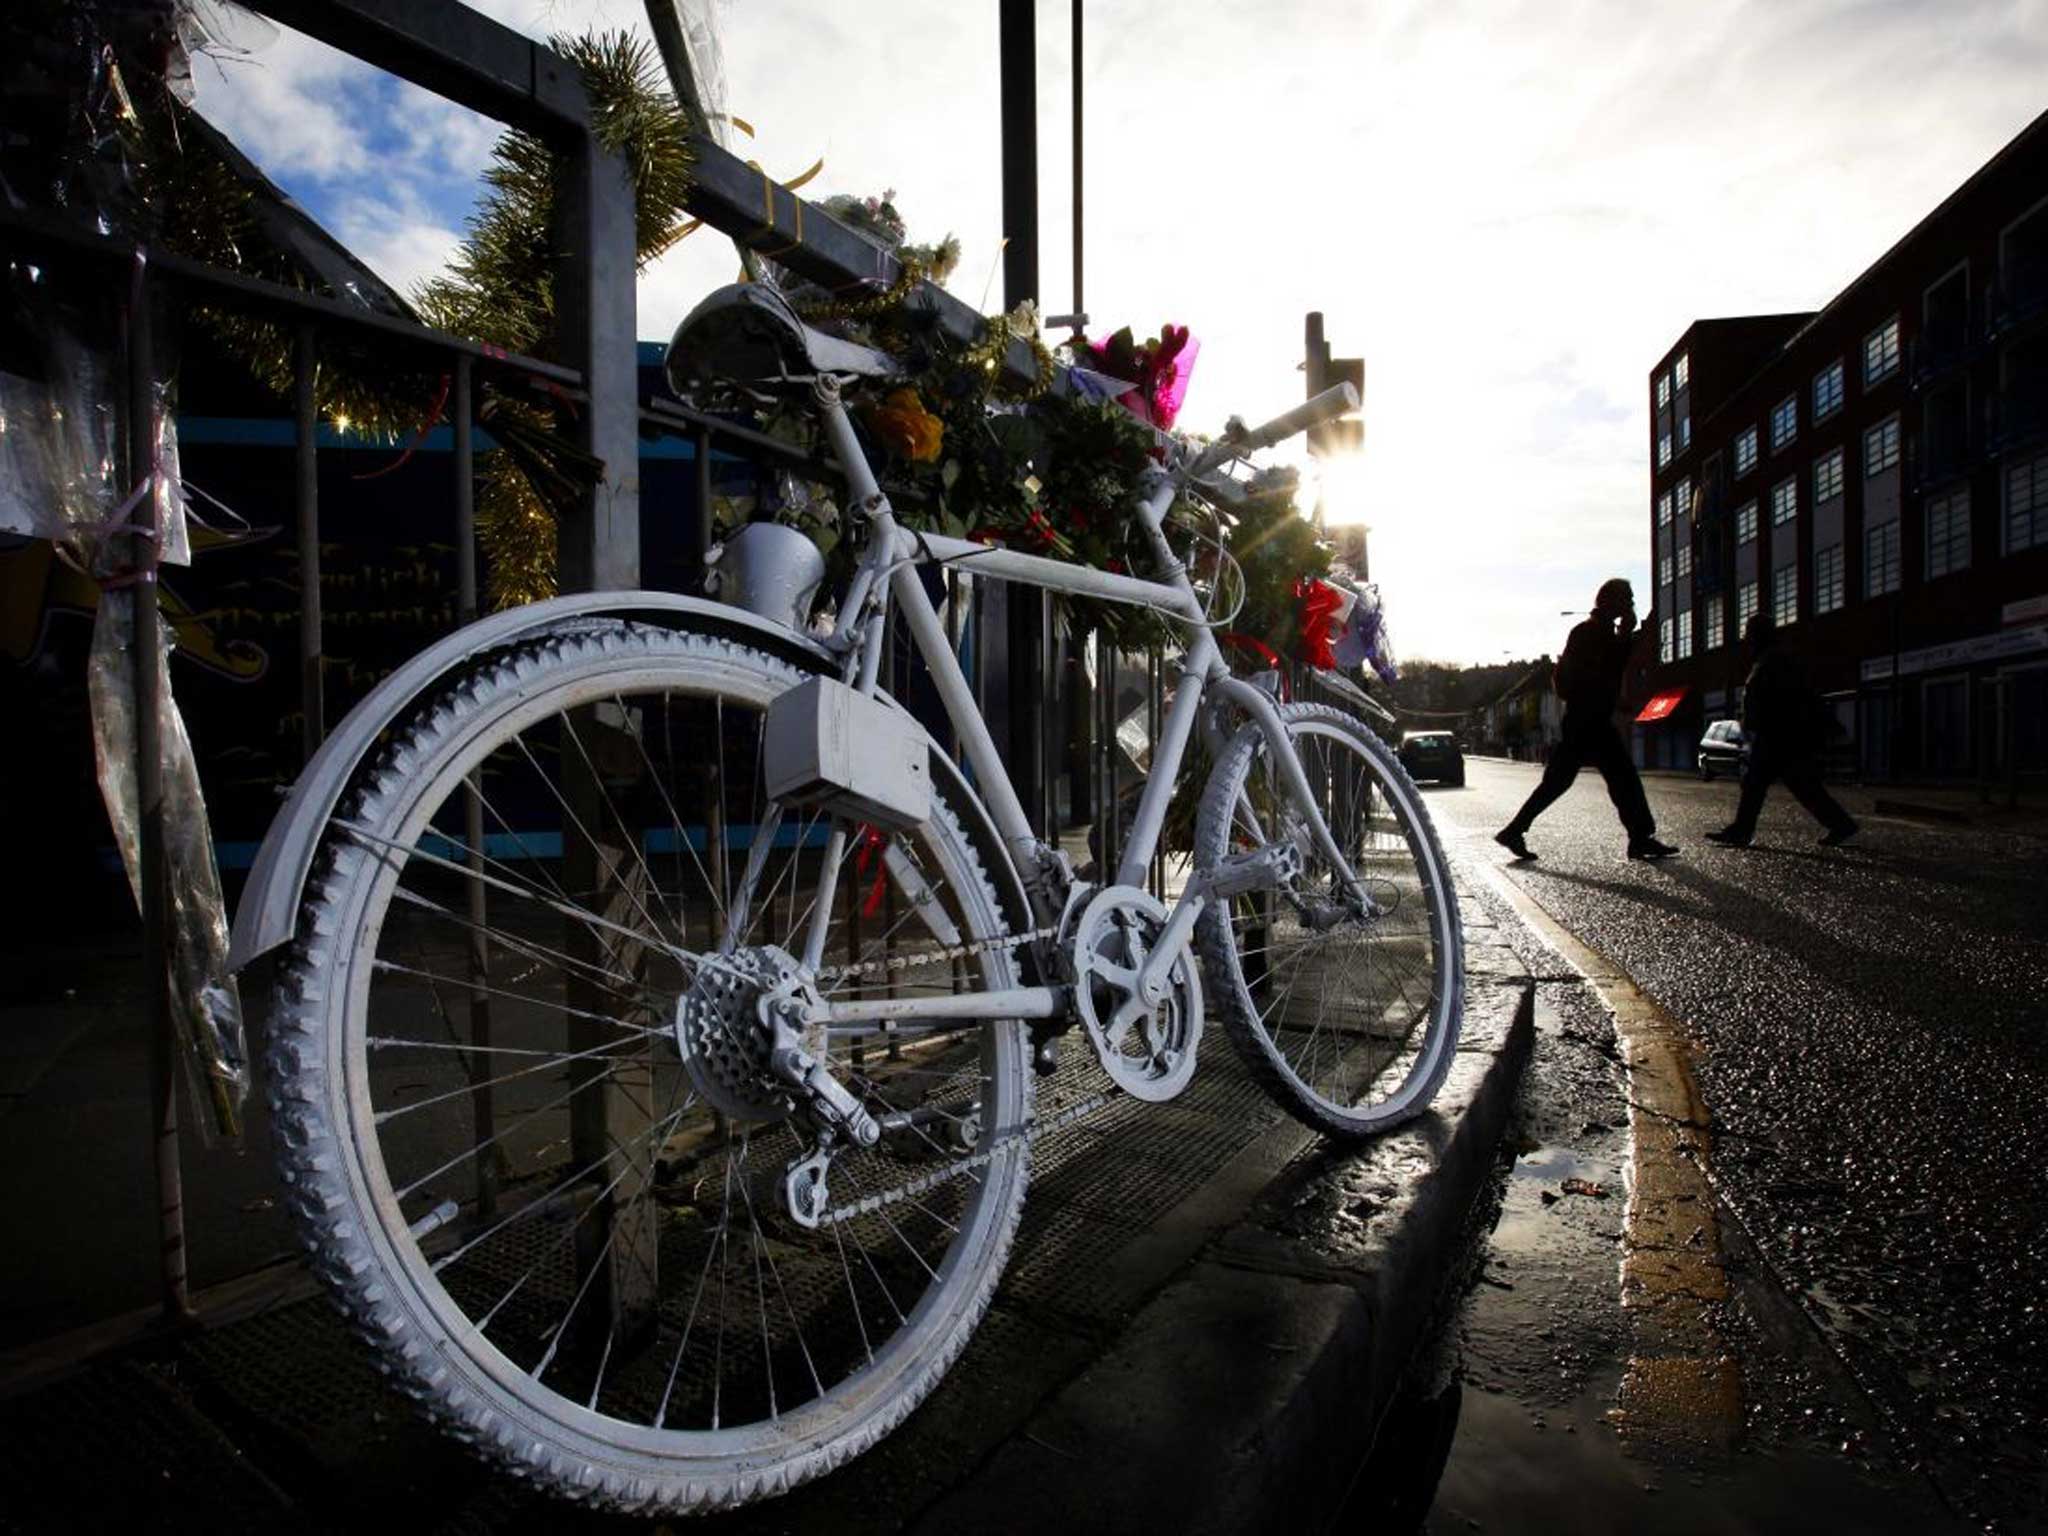 Cycling deaths are rare: there were 14 deaths from 180 million trips in London last year